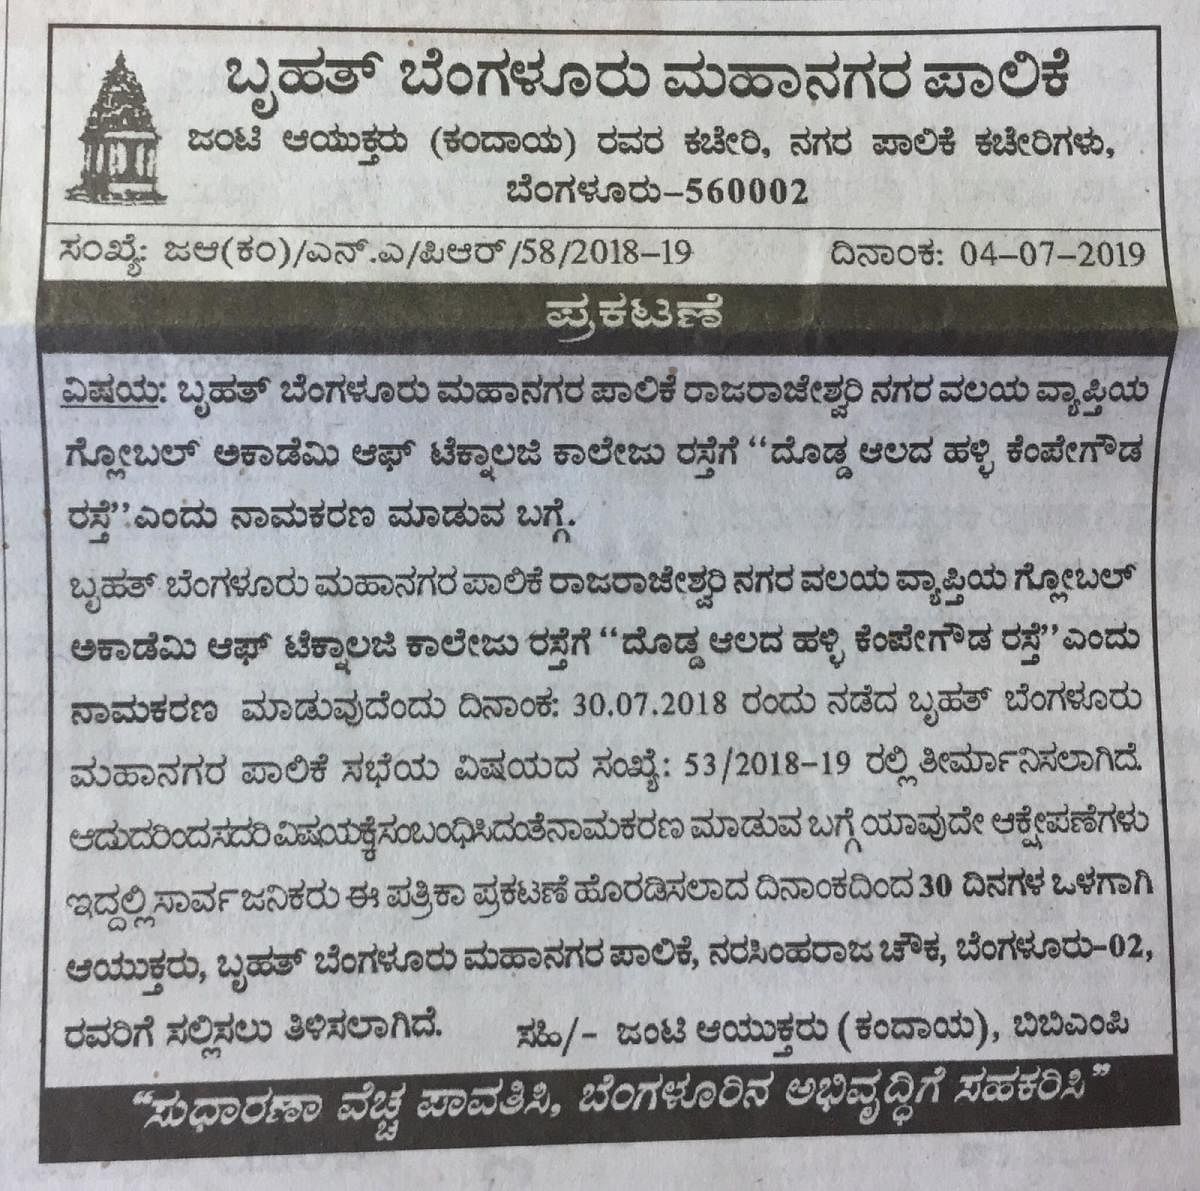 The tender advertisement issued by the BBMP. 